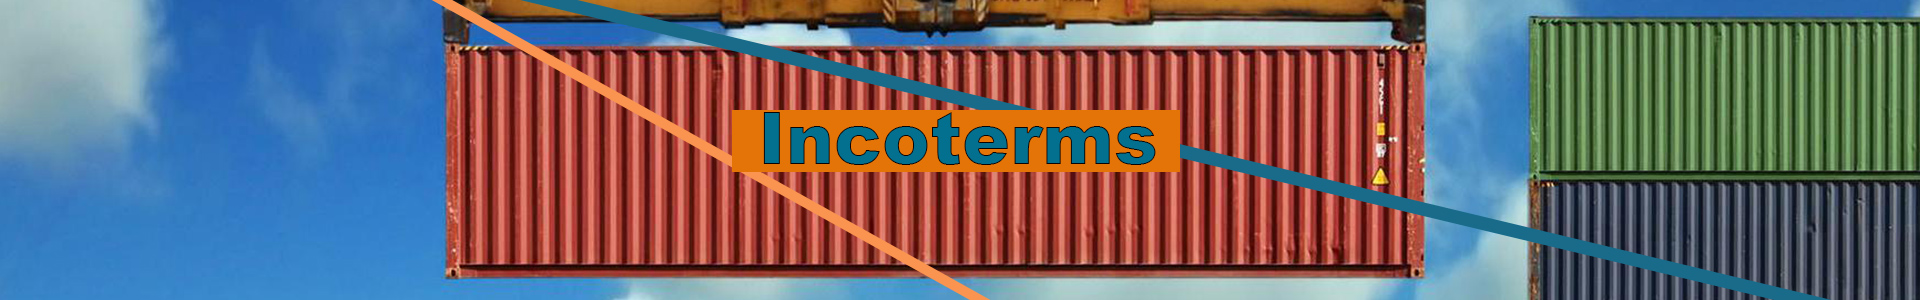 about_order_incoterms